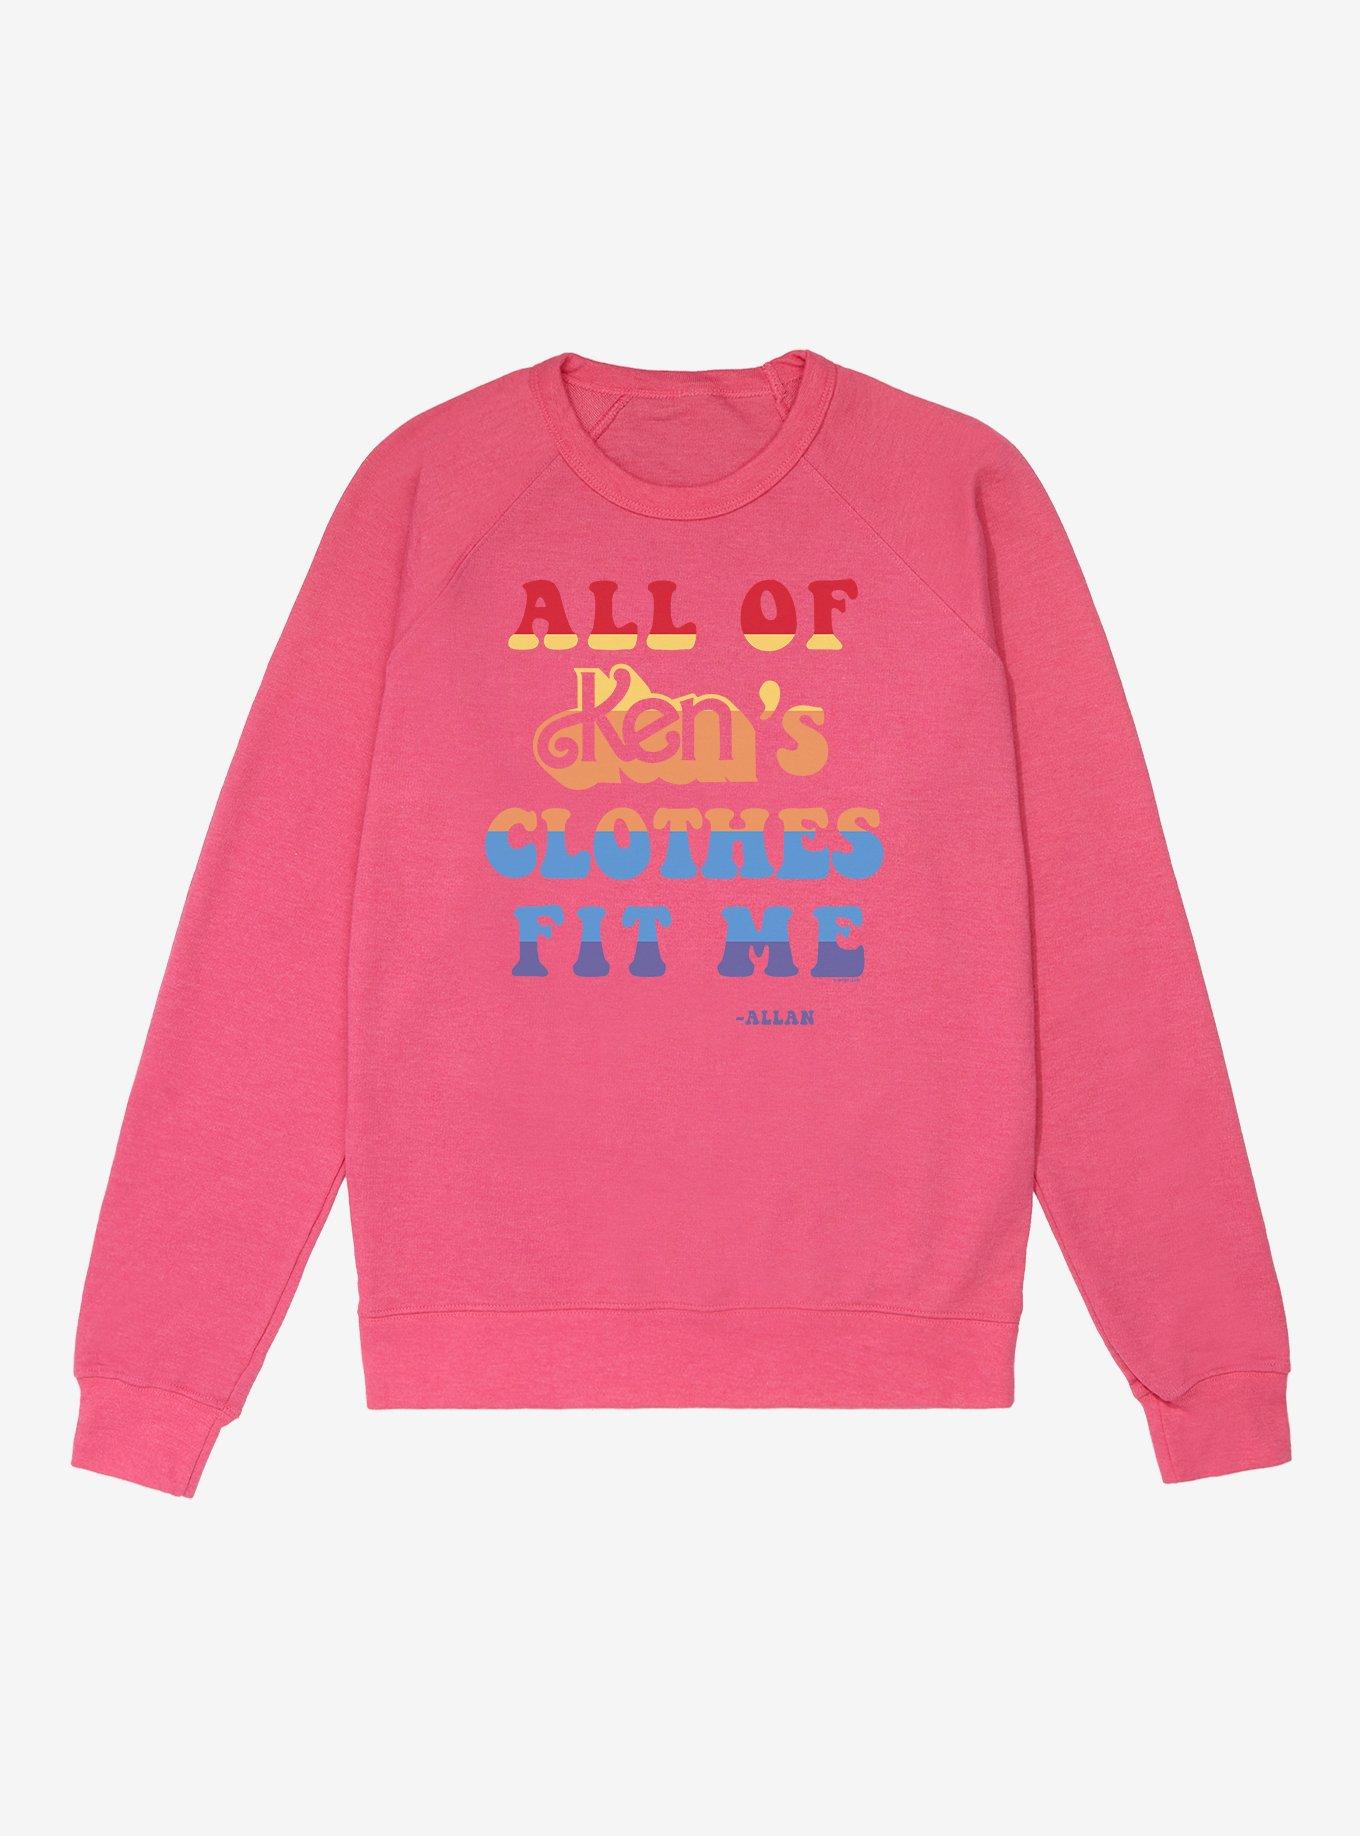 Barbie Movie Allan's All of Ken's Clothes Fit Me French Terry Sweatshirt